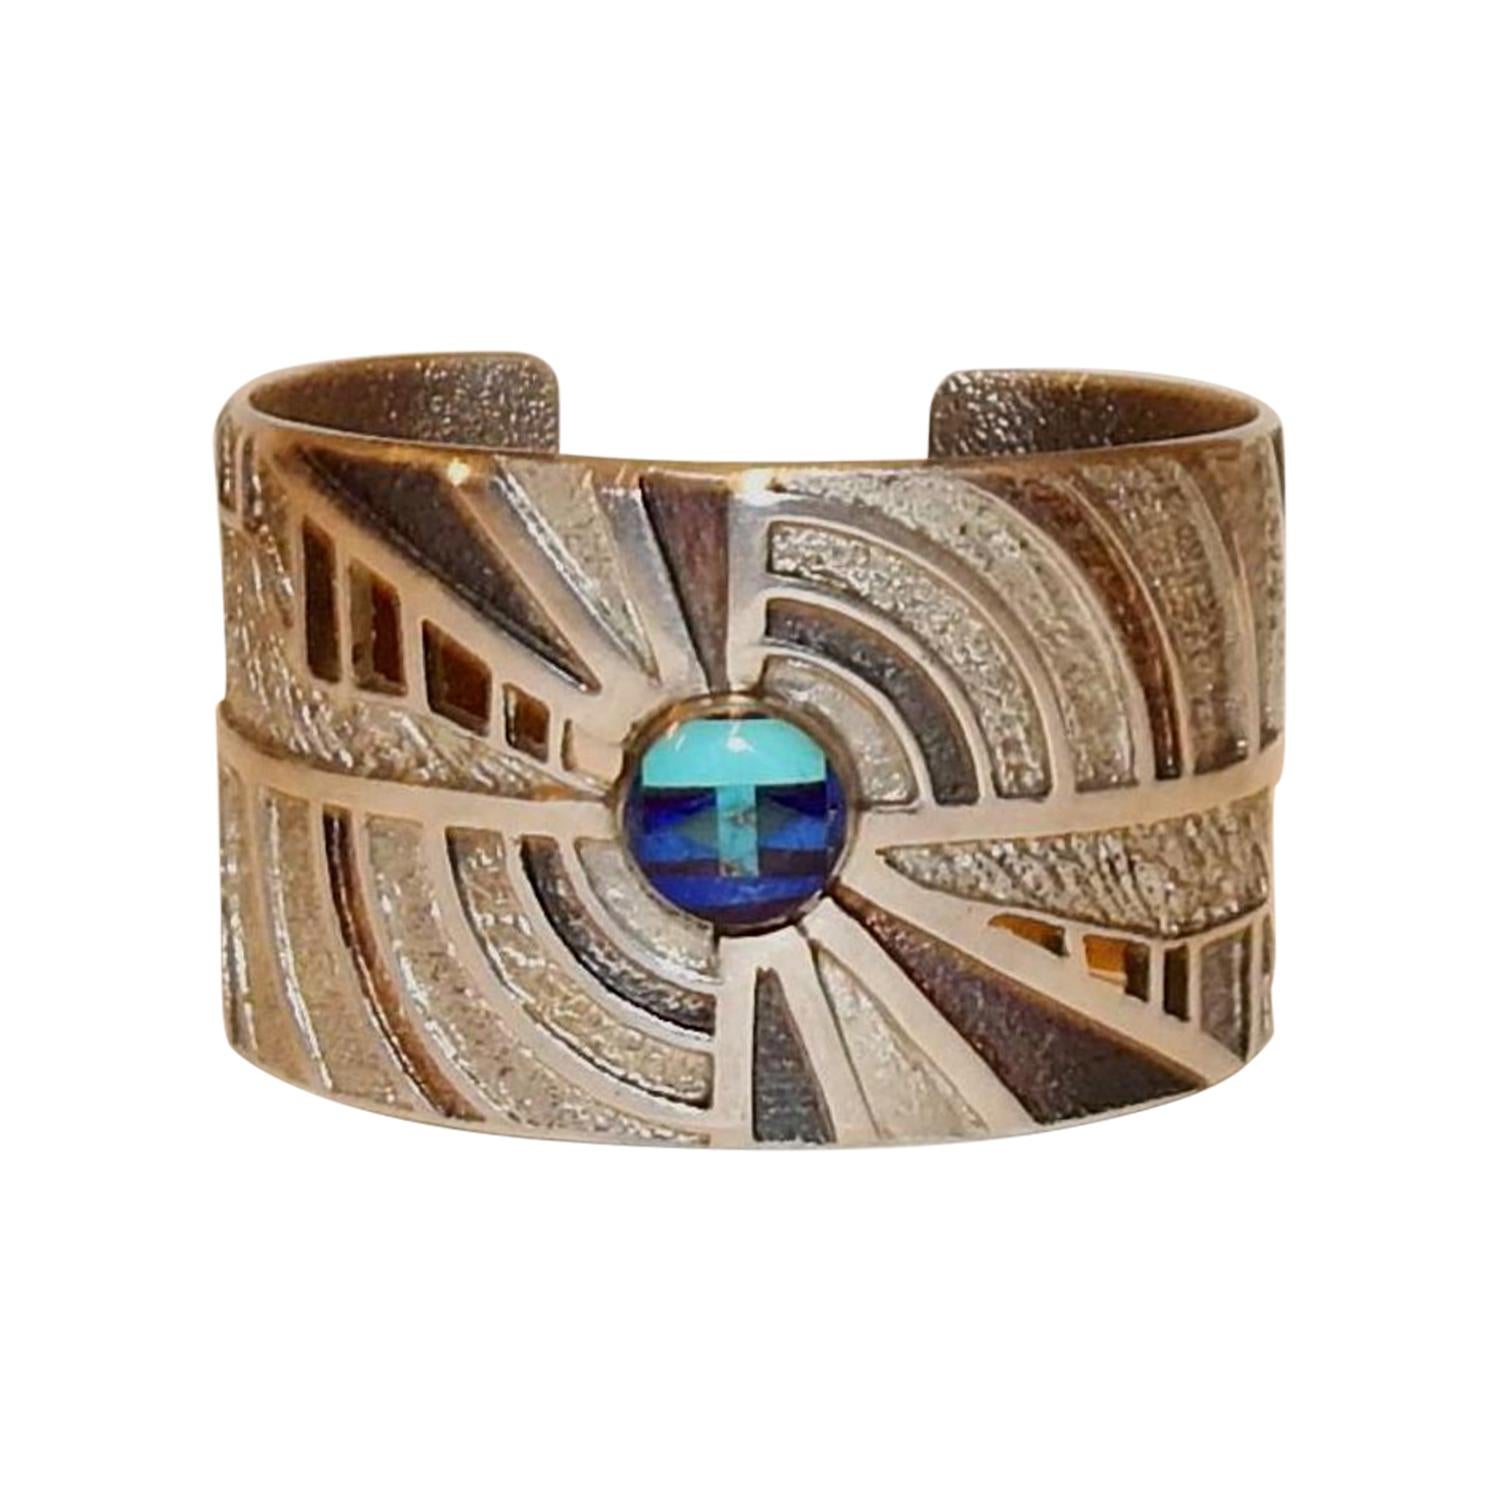 Edward Charlie Navajo Jeweler, Sterling Bracelet with Lapis and Turquoise